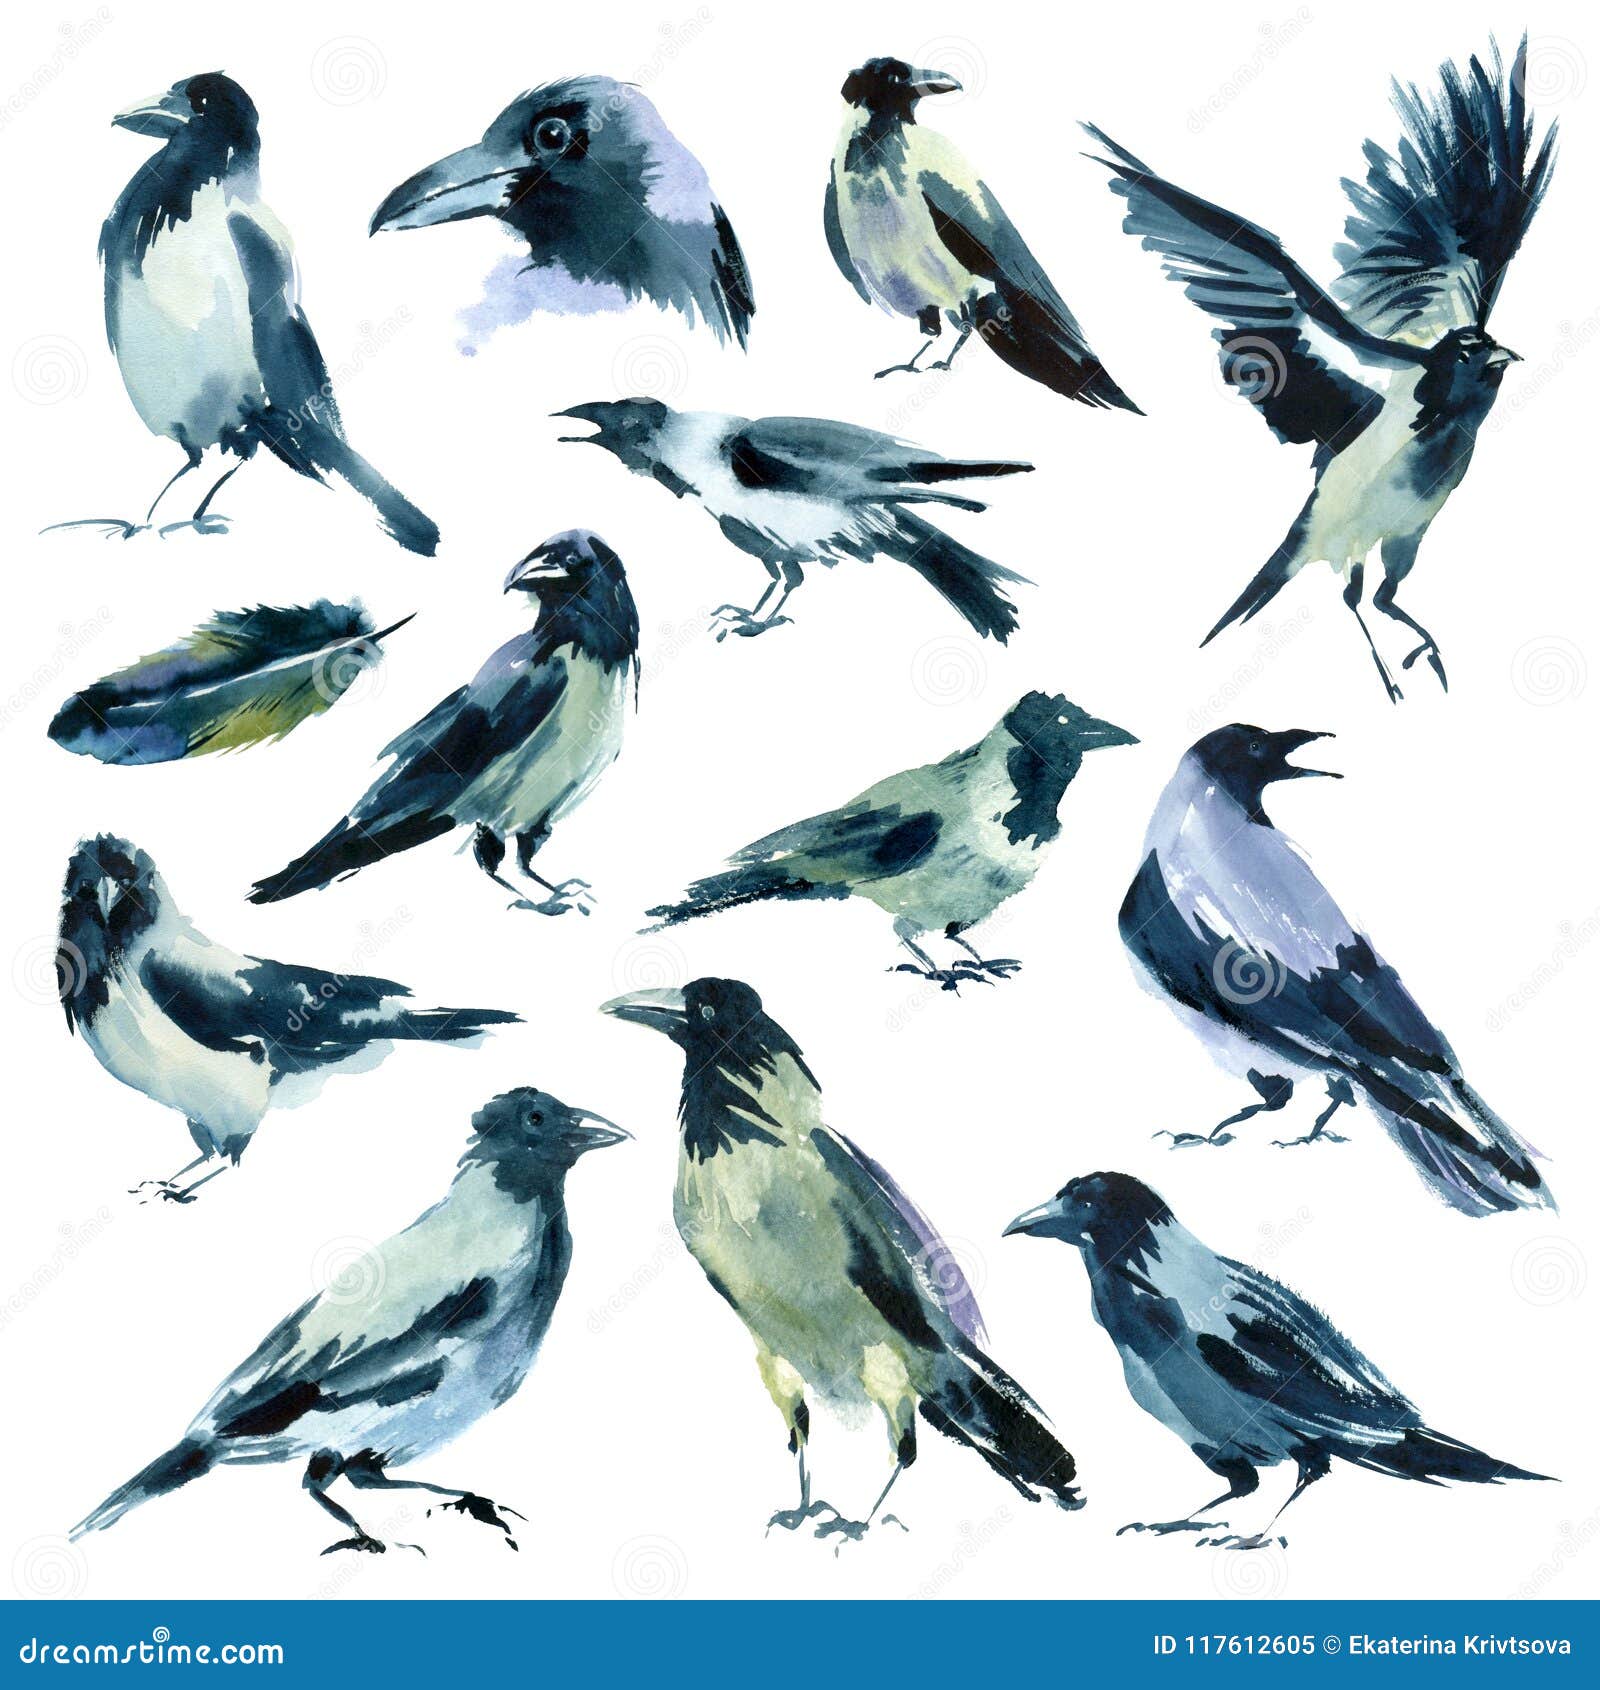 https://thumbs.dreamstime.com/z/watercolor-set-sketches-birds-painting-flock-gray-crows-feather-white-background-117612605.jpg